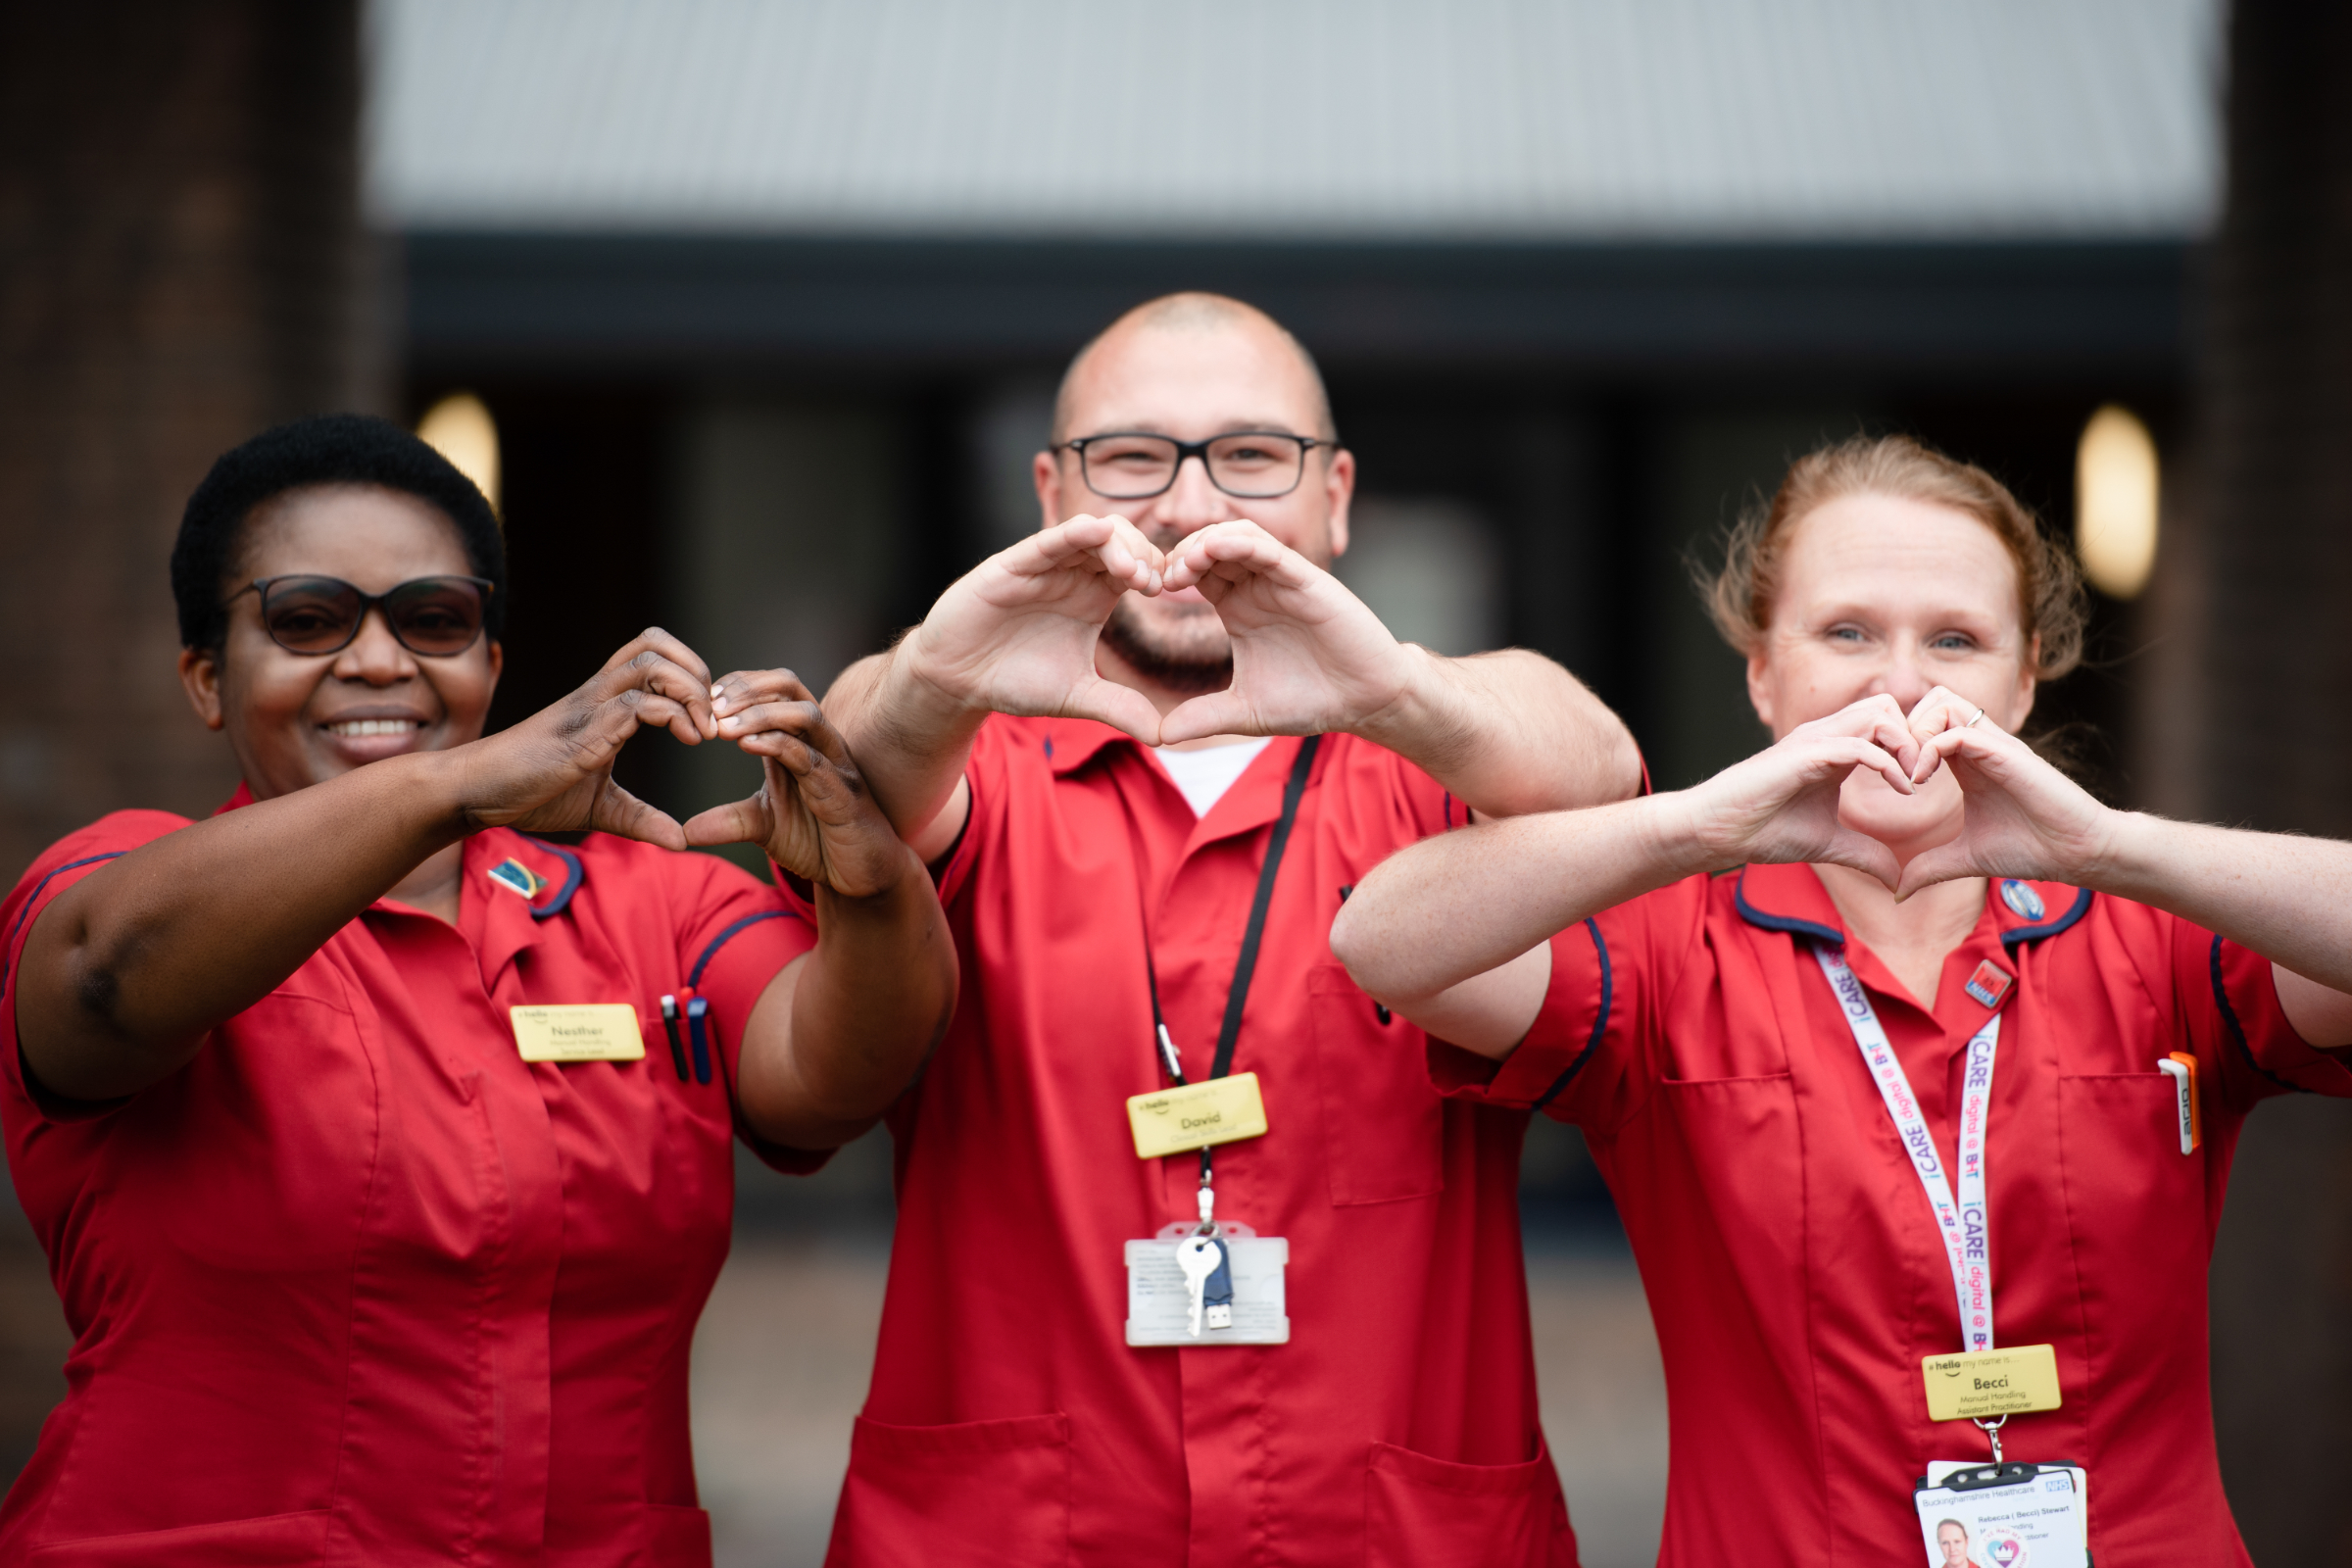 Three members of staff at Stoke Mandeville Hospital; a black woman, a white man wearing glasses and a white woman. They are all wearing red scrubs and making a heart shape with their hands.